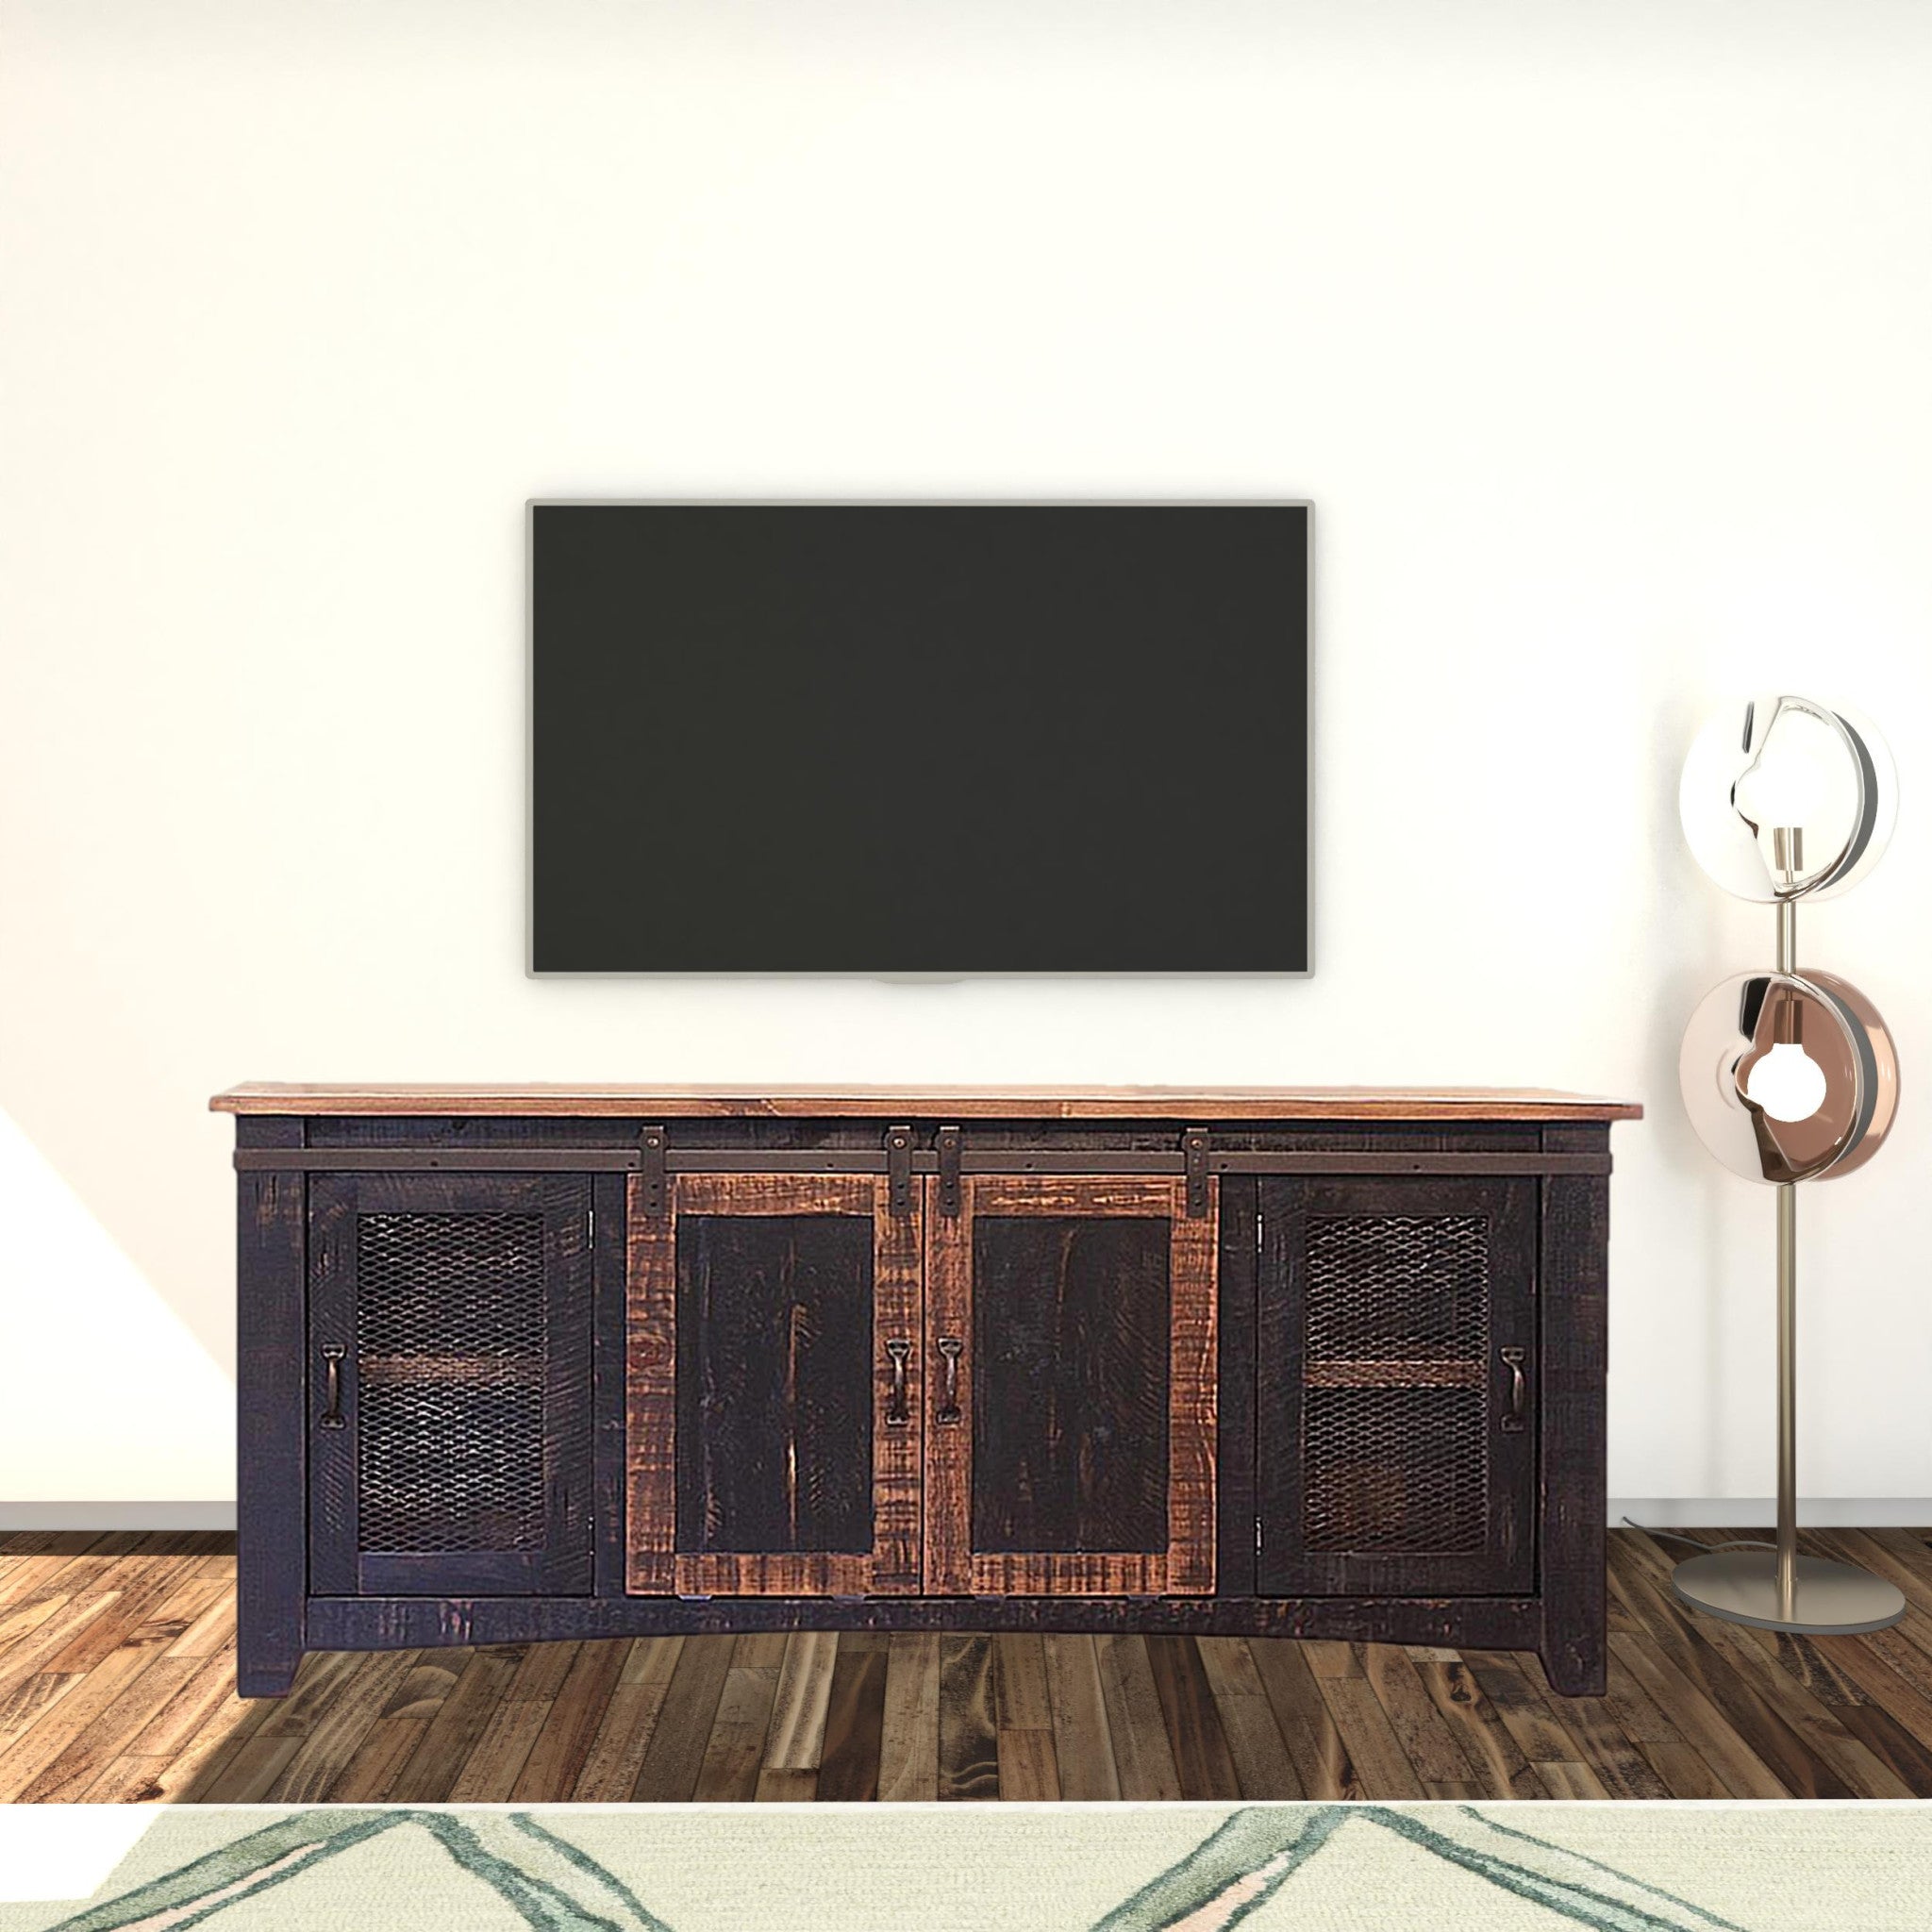 70" Black Solid Wood Cabinet Enclosed Storage Distressed TV Stand